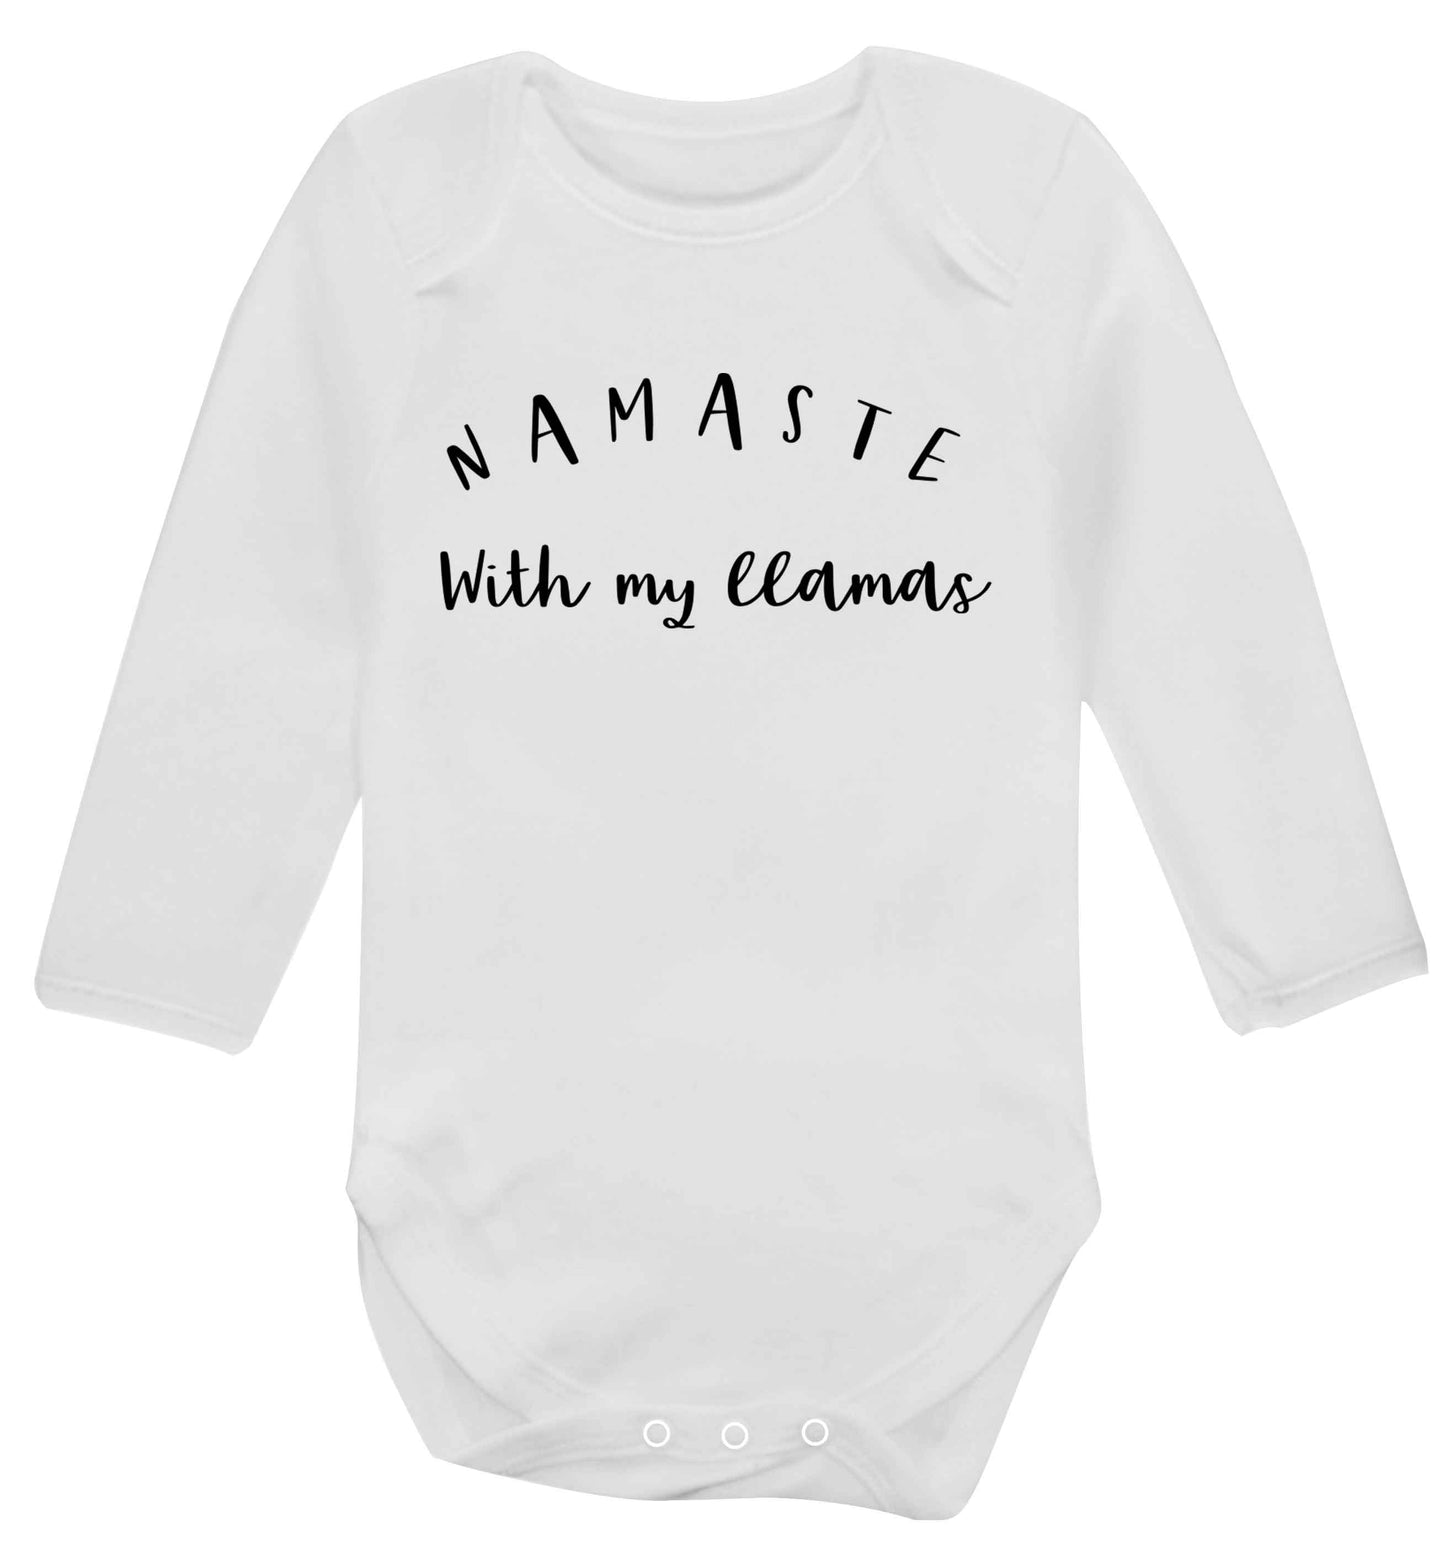 Namaste with my llamas Baby Vest long sleeved white 6-12 months